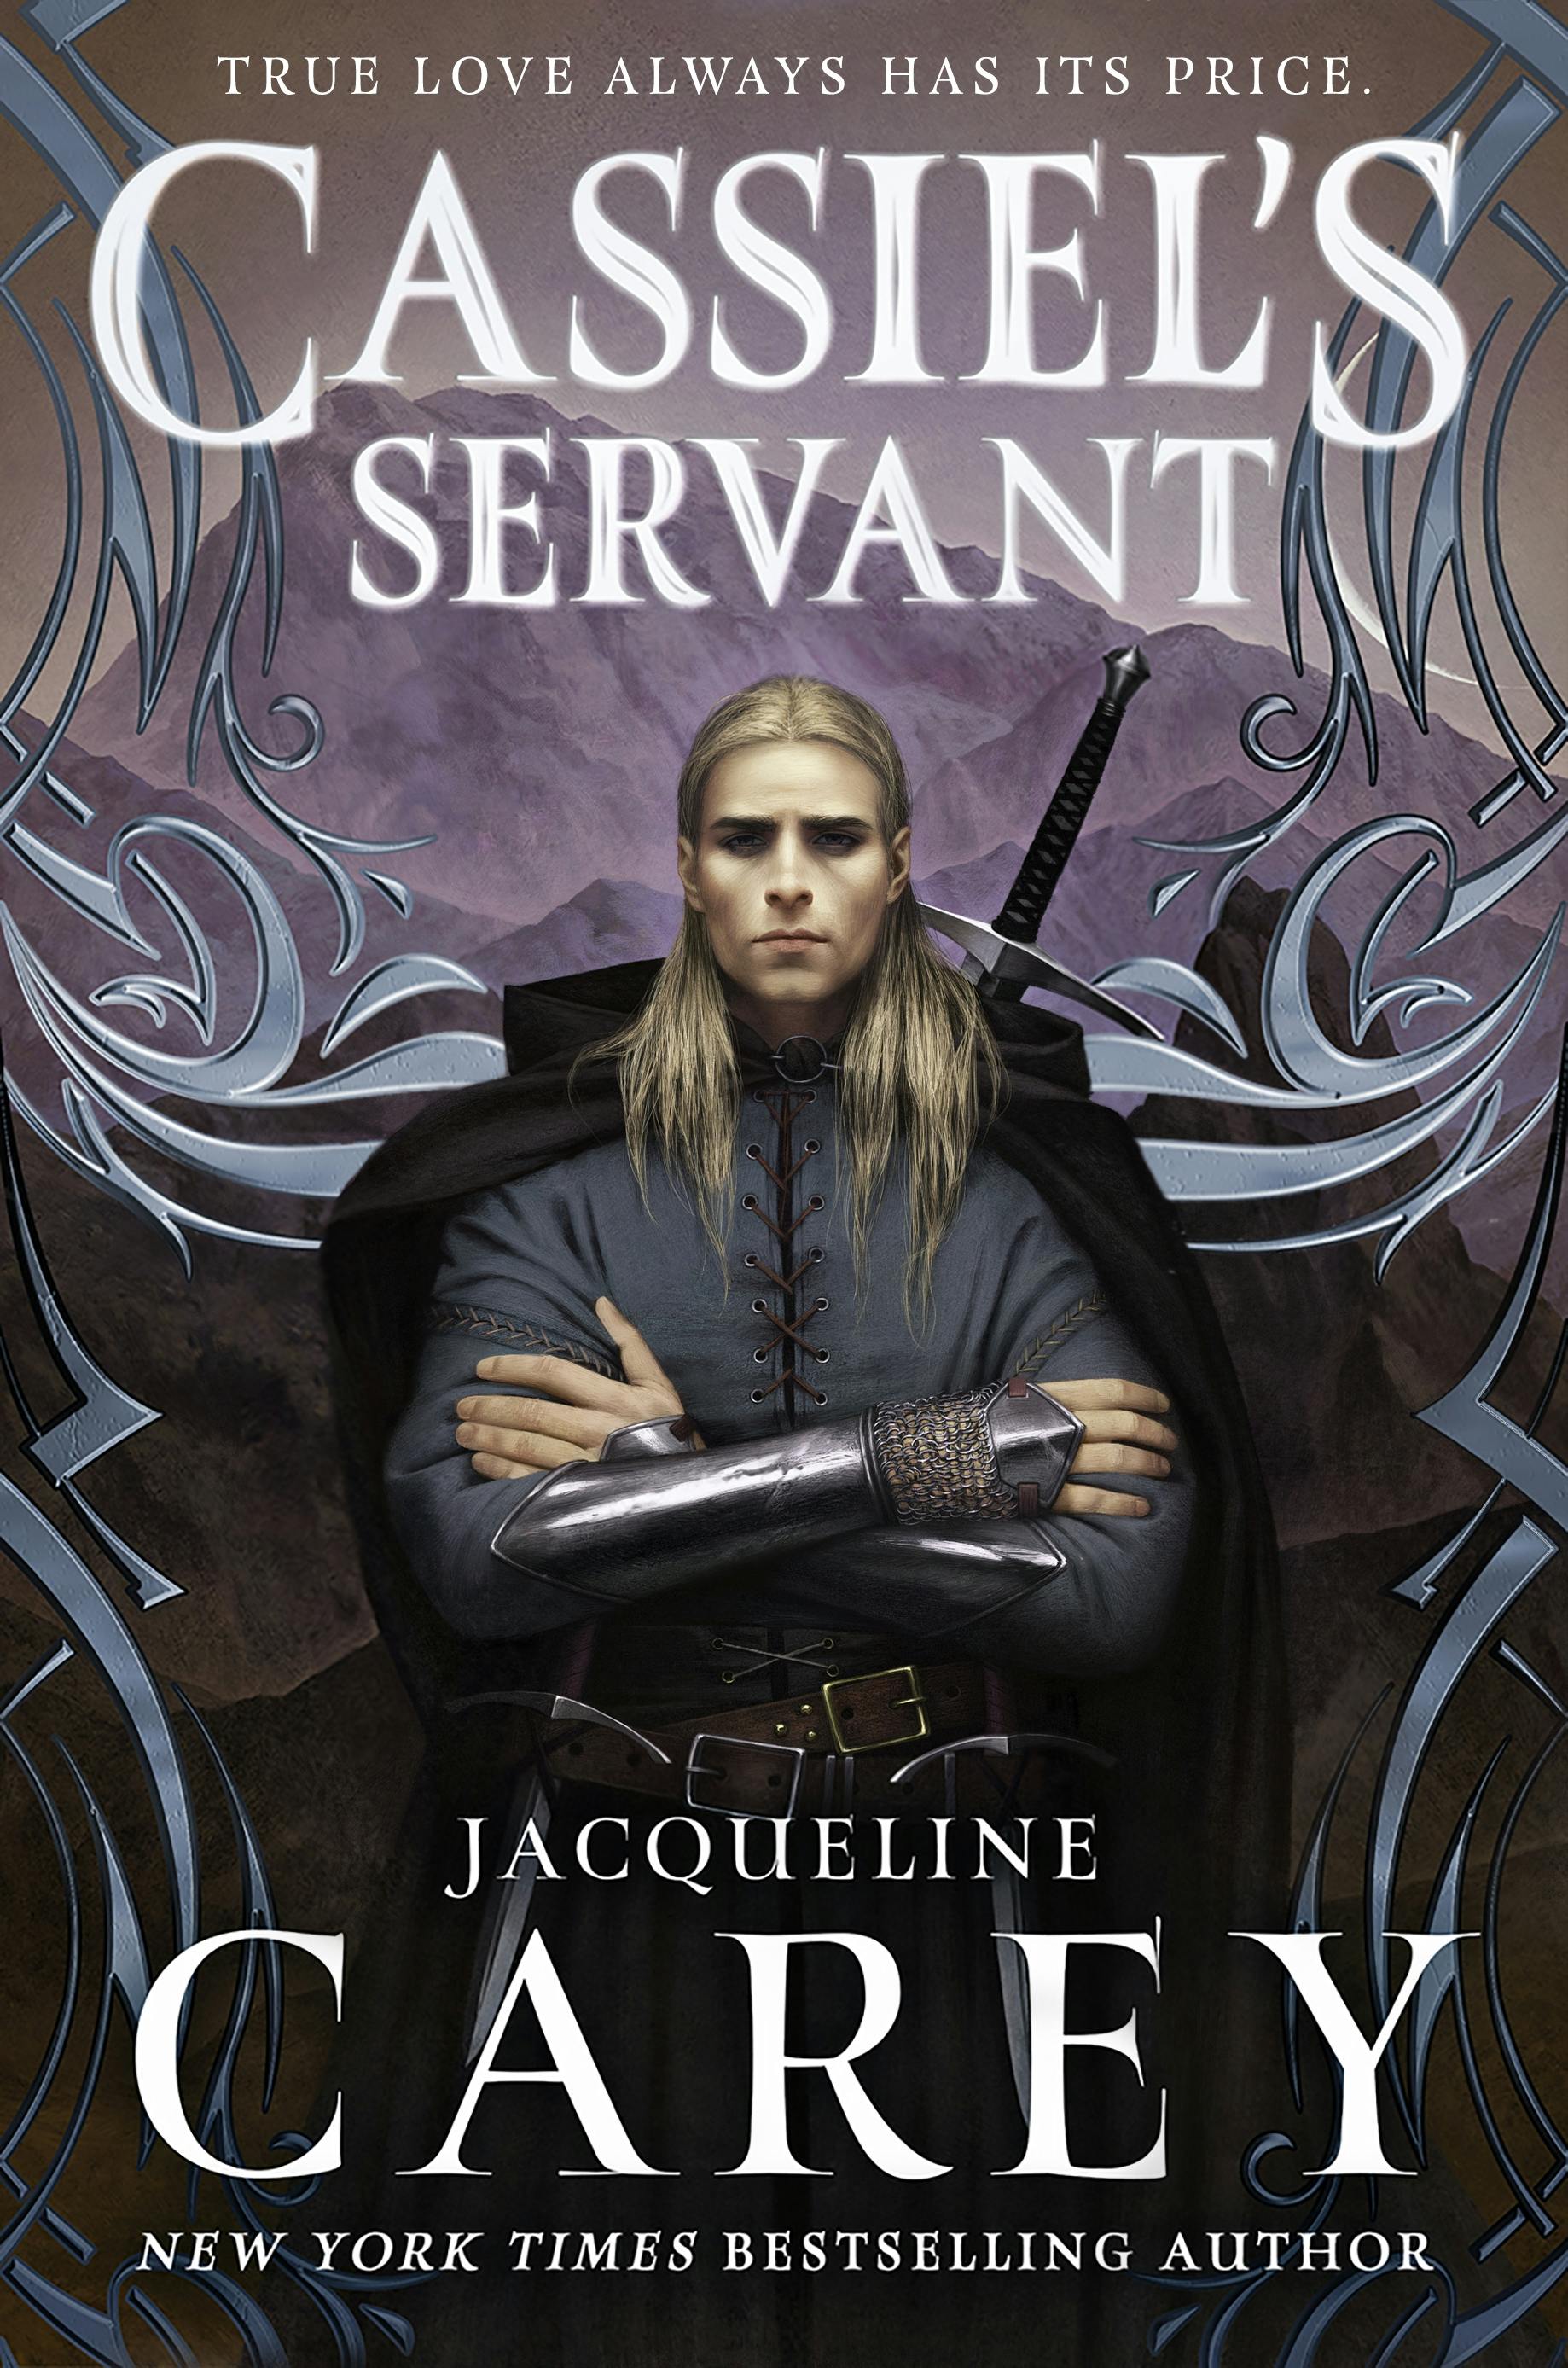 Cover for the book titled as: Cassiel's Servant